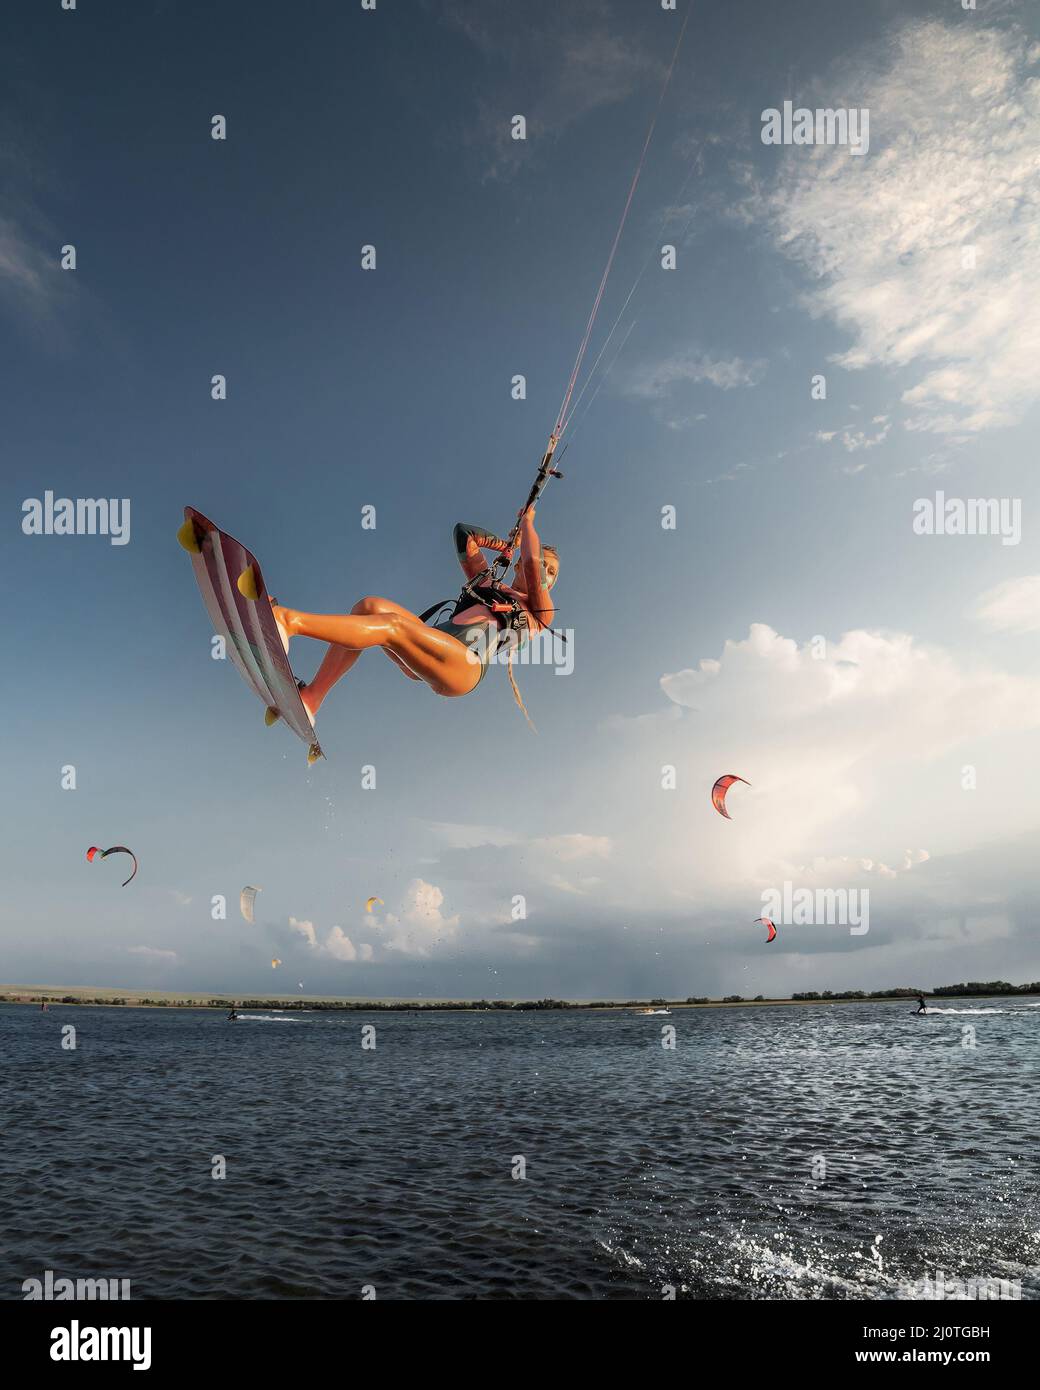 Professional athlete kitesurfer young caucasian woman doing a trick in the air against the backdrop of the sunset sky and clouds Stock Photo